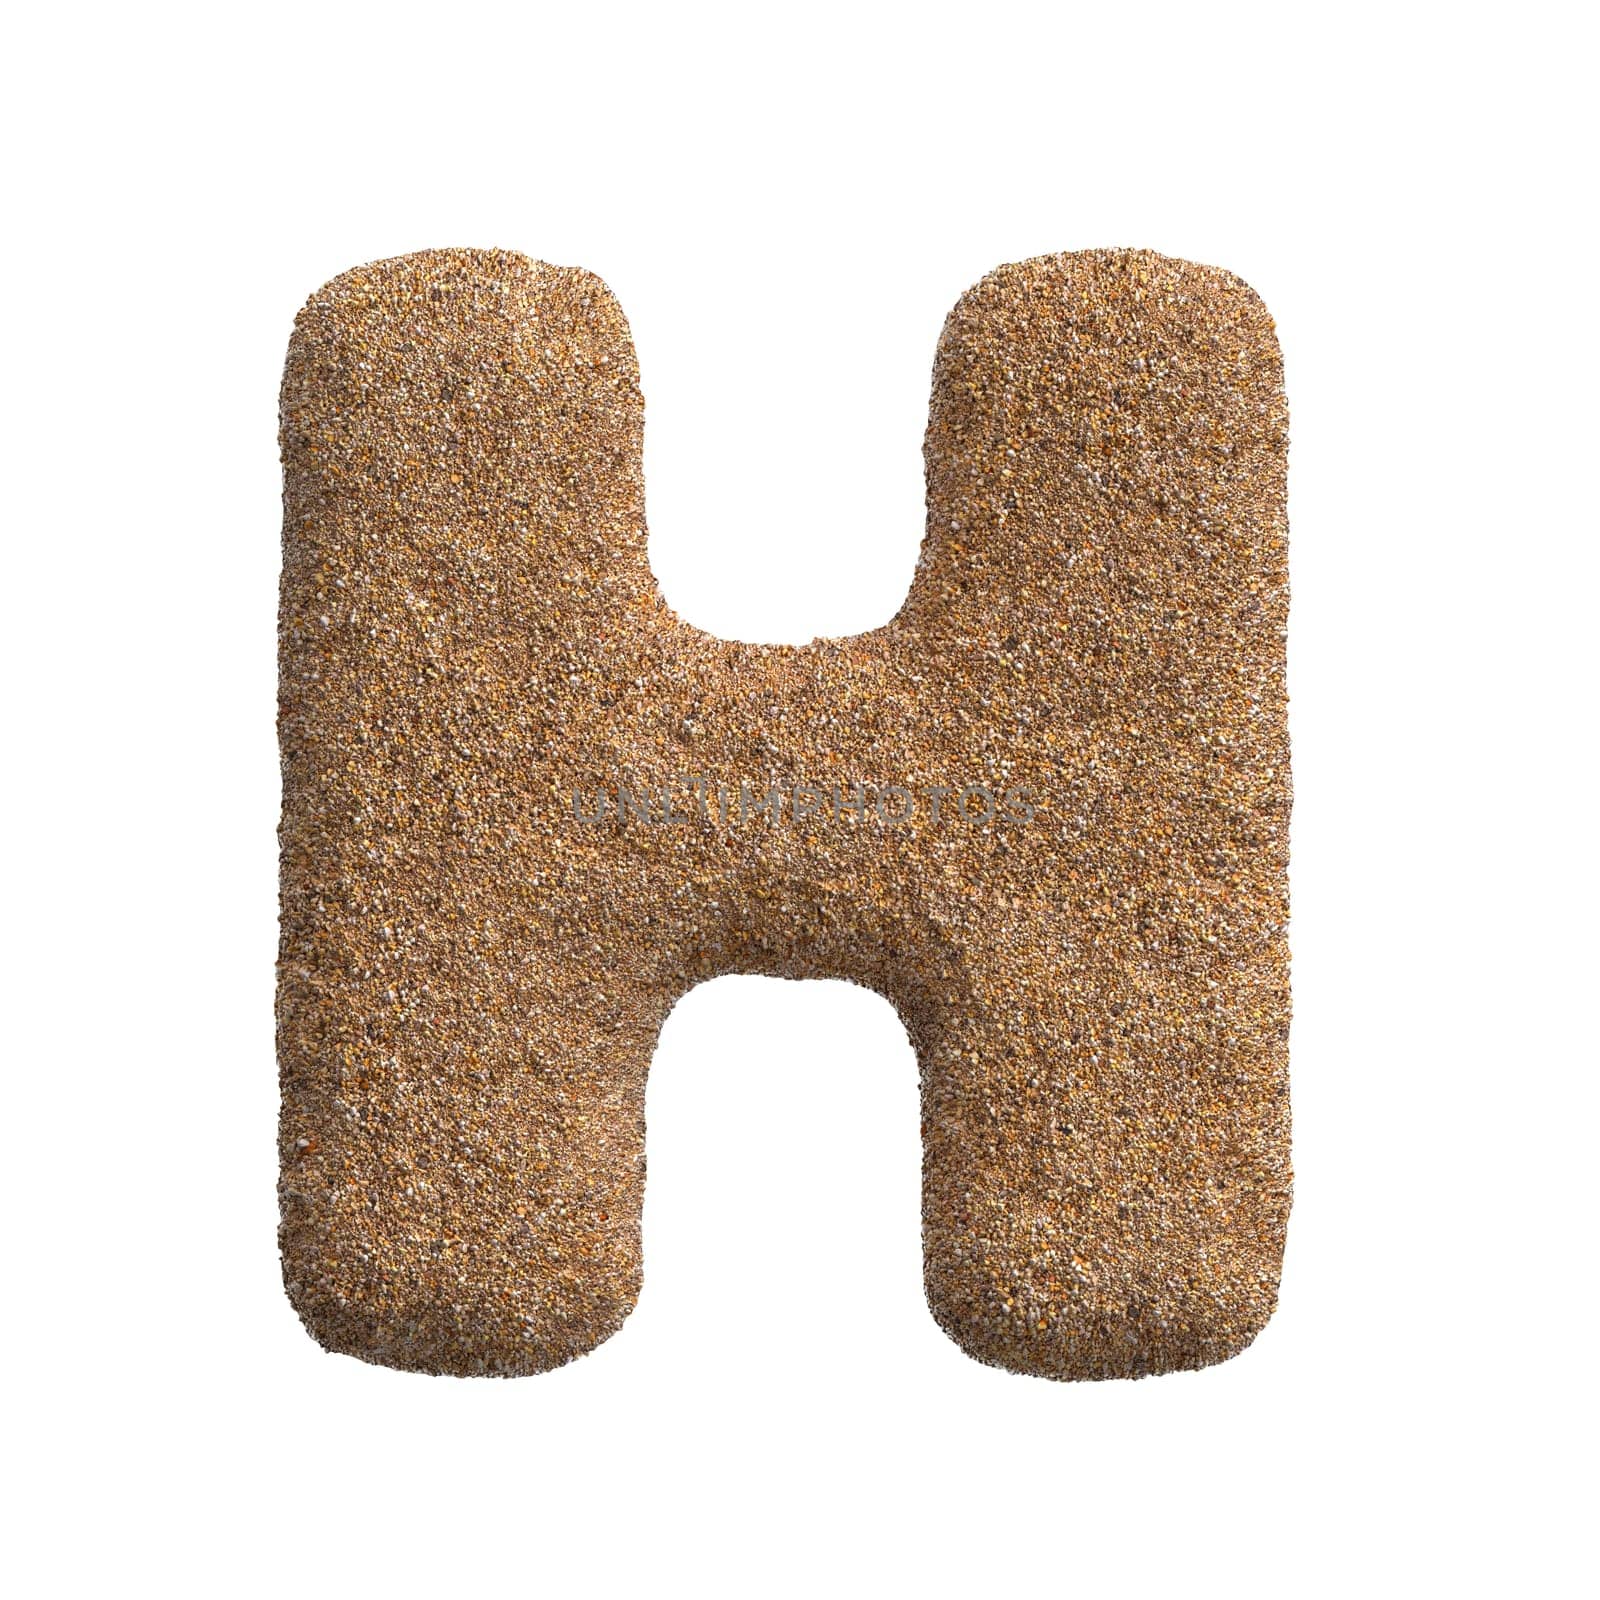 Sand letter H - large 3d beach font isolated on white background. This alphabet is perfect for creative illustrations related but not limited to Holidays, travel, ocean...